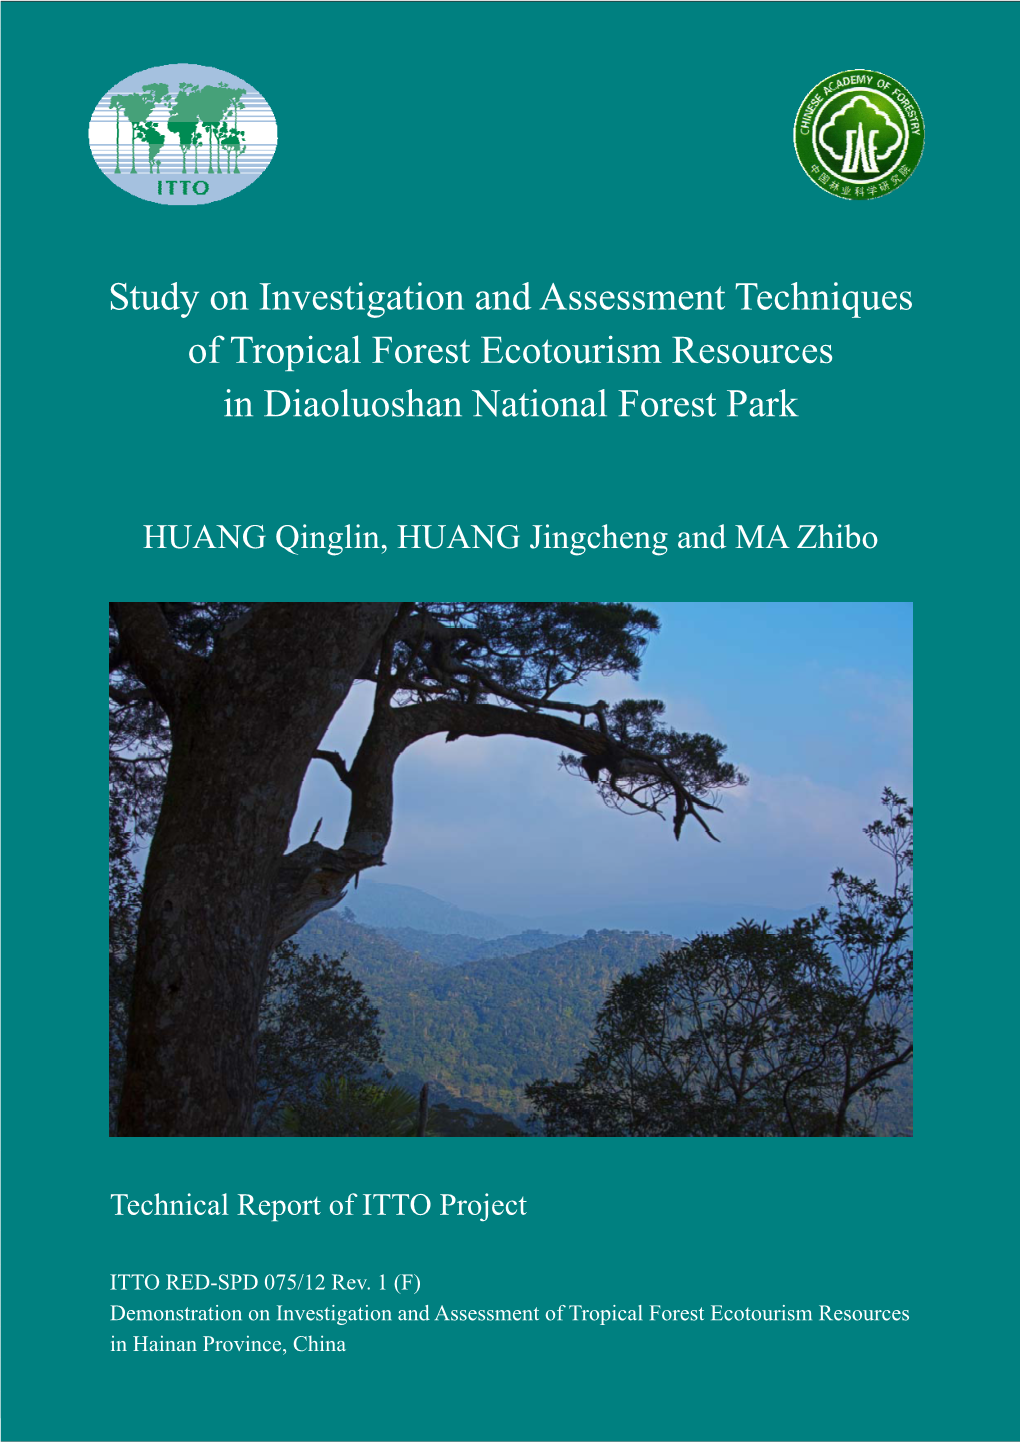 Study on Investigation and Assessment Techniques of Tropical Forest Ecotourism Resources in Diaoluoshan National Forest Park